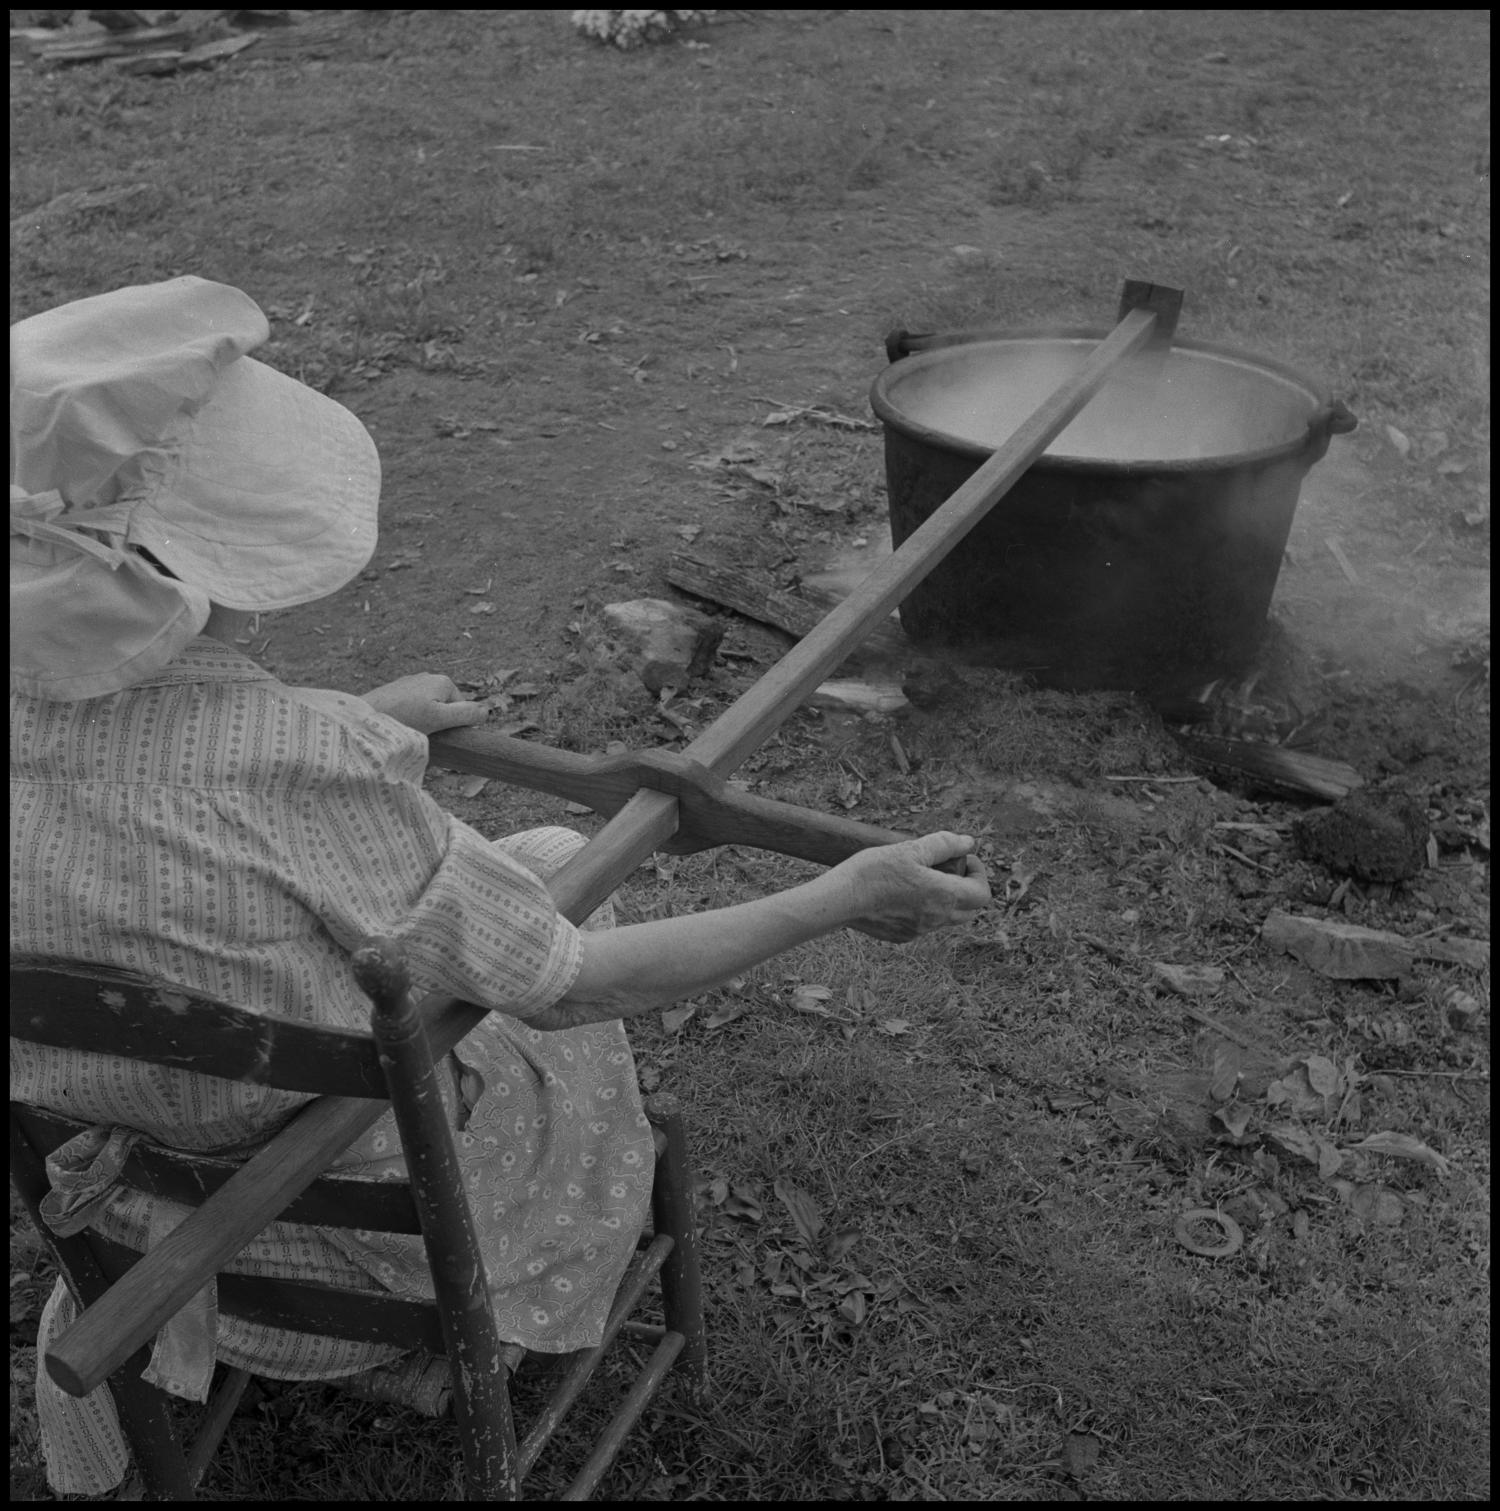 Woman stirring a large pot] - The Portal to Texas History